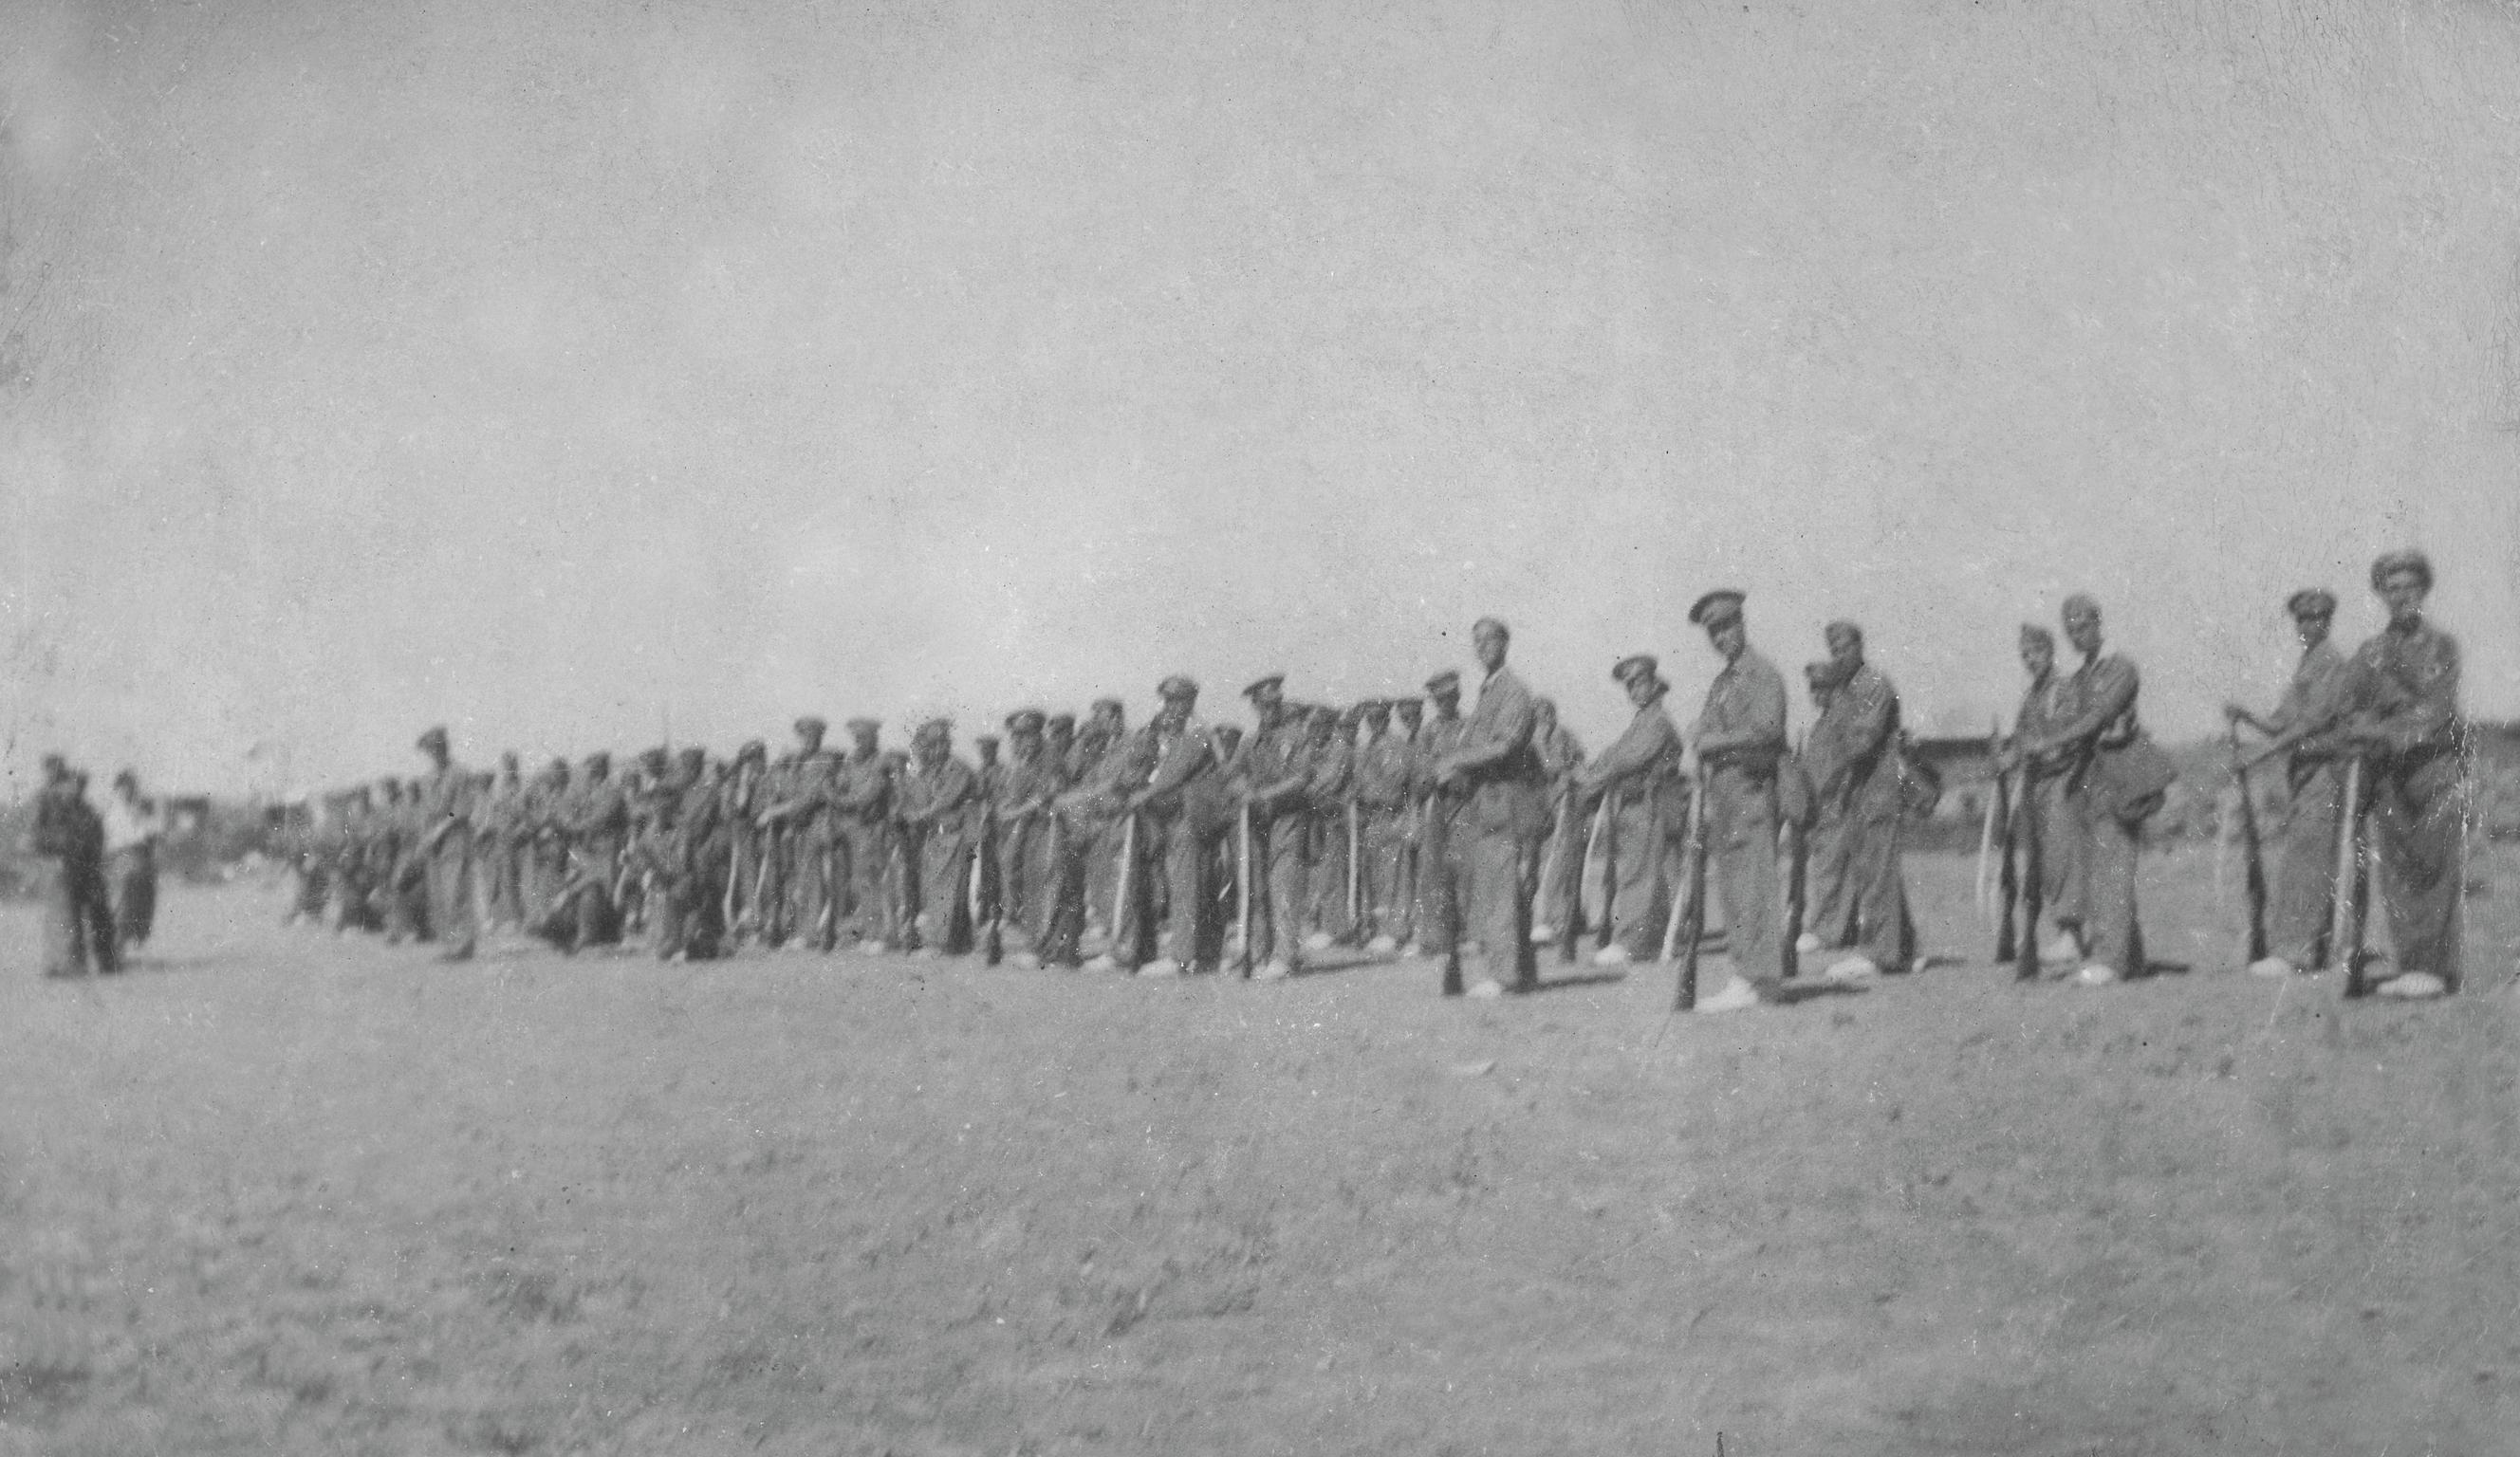 Spanish Republican troops 1937, photograph